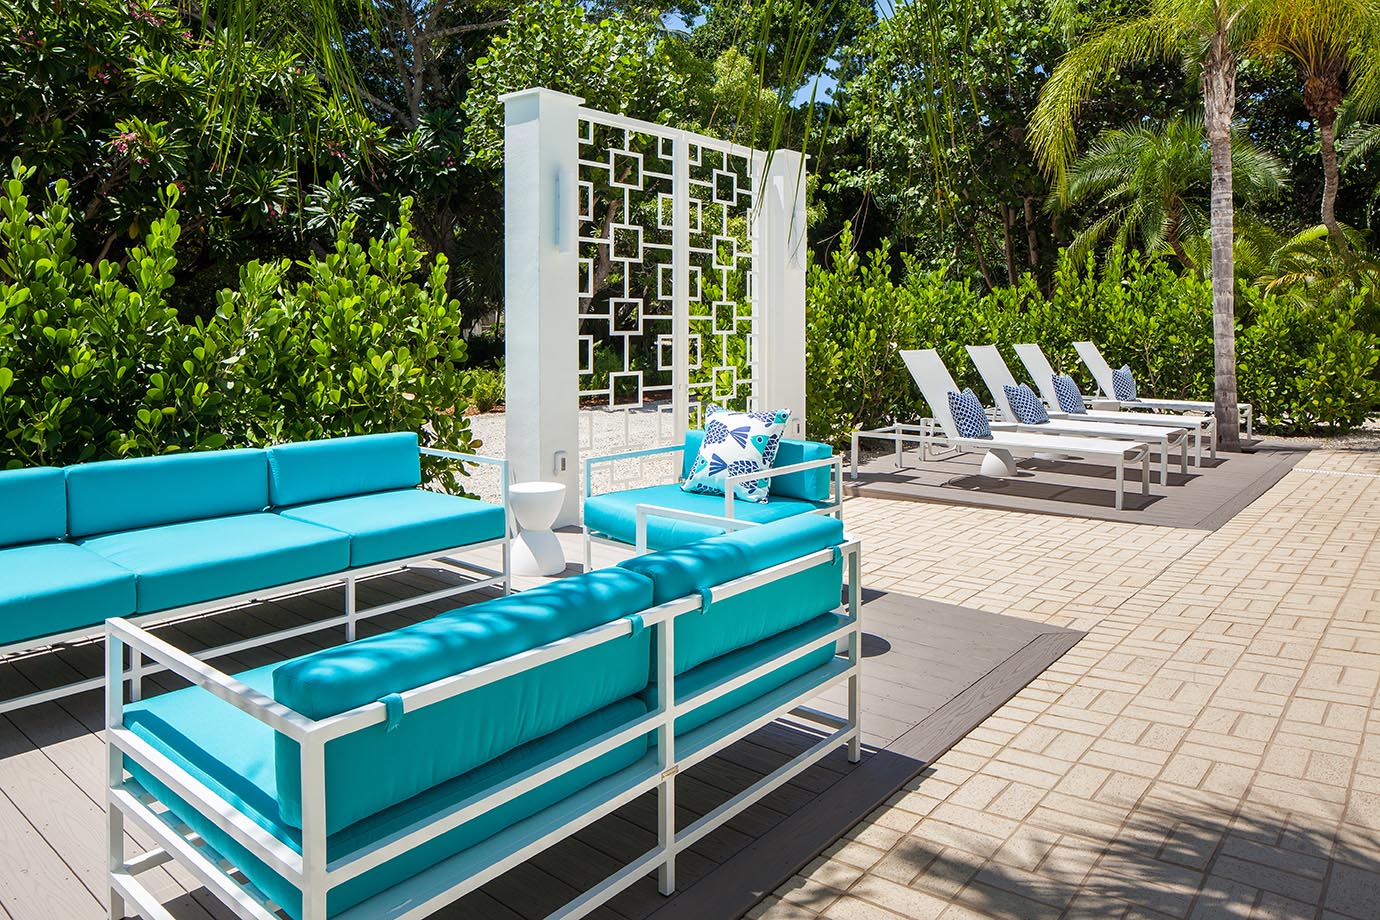 Teal patio furniture next to palm trees near white gate at the Sea Oats Estate in Captiva Island, FL